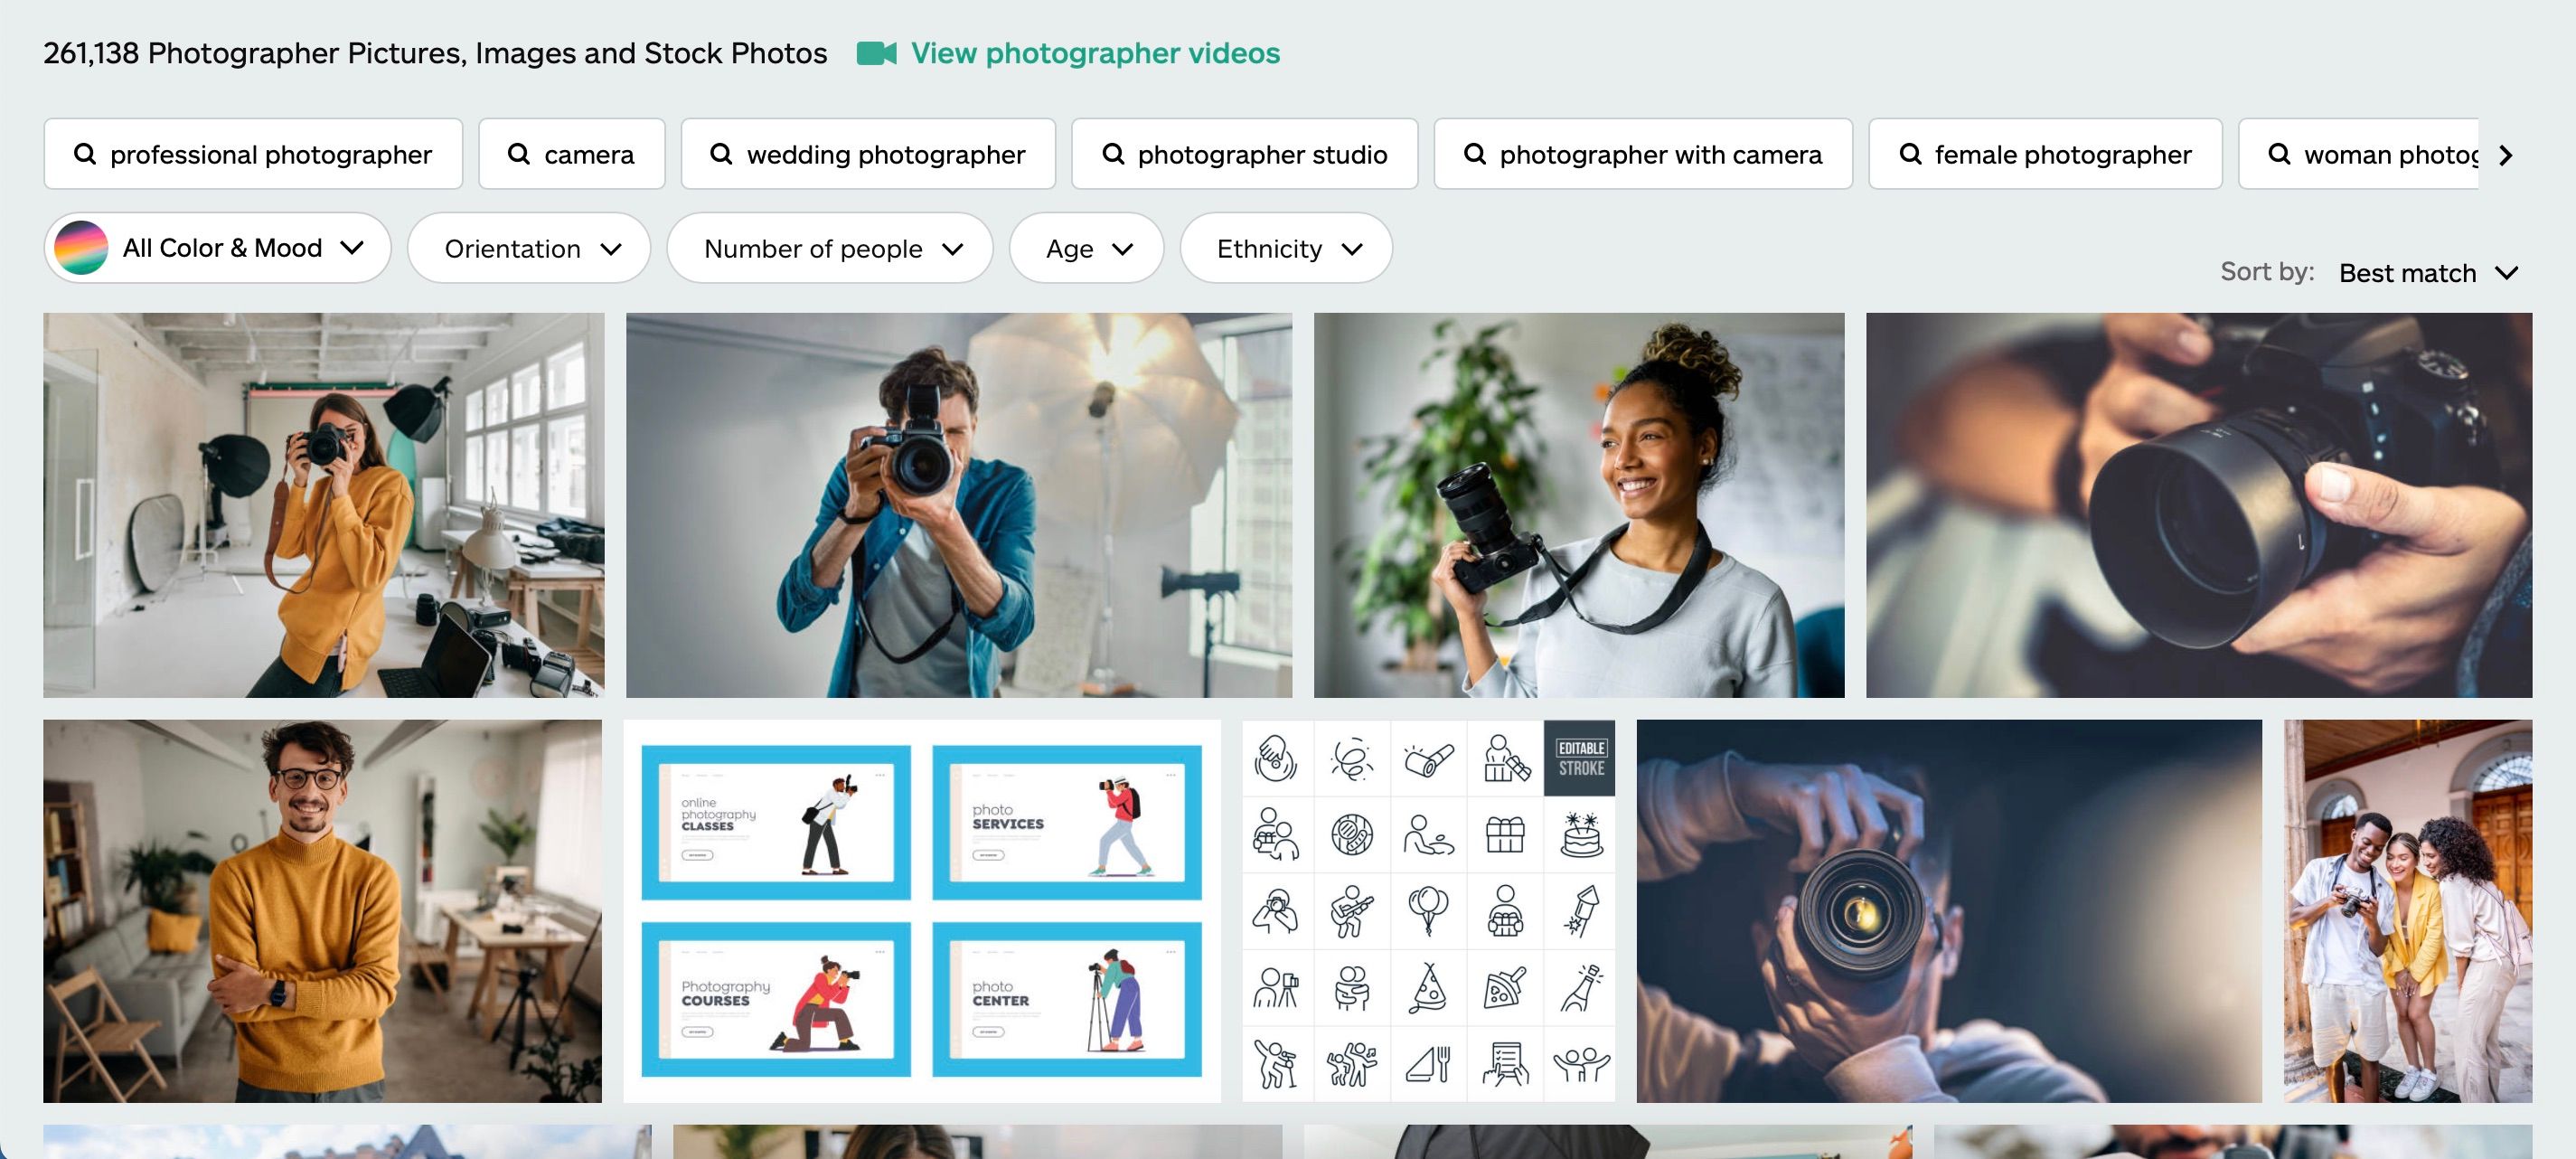 Search Result Showing Images for Sale on iStock